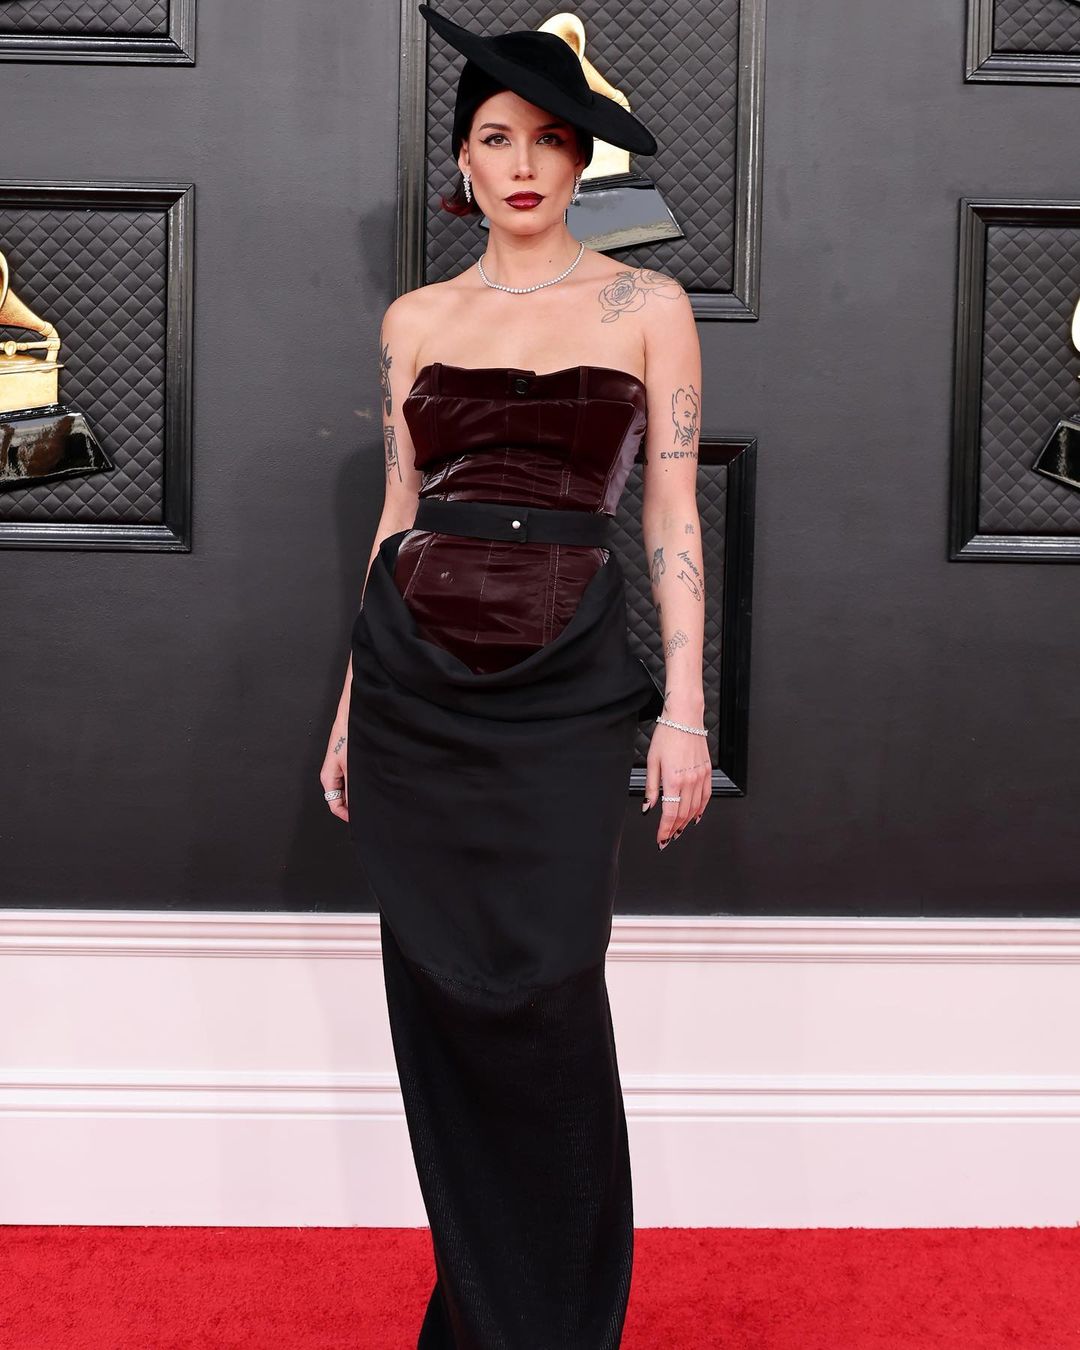 Halsey looked uber chic in the Pressiat ensemble